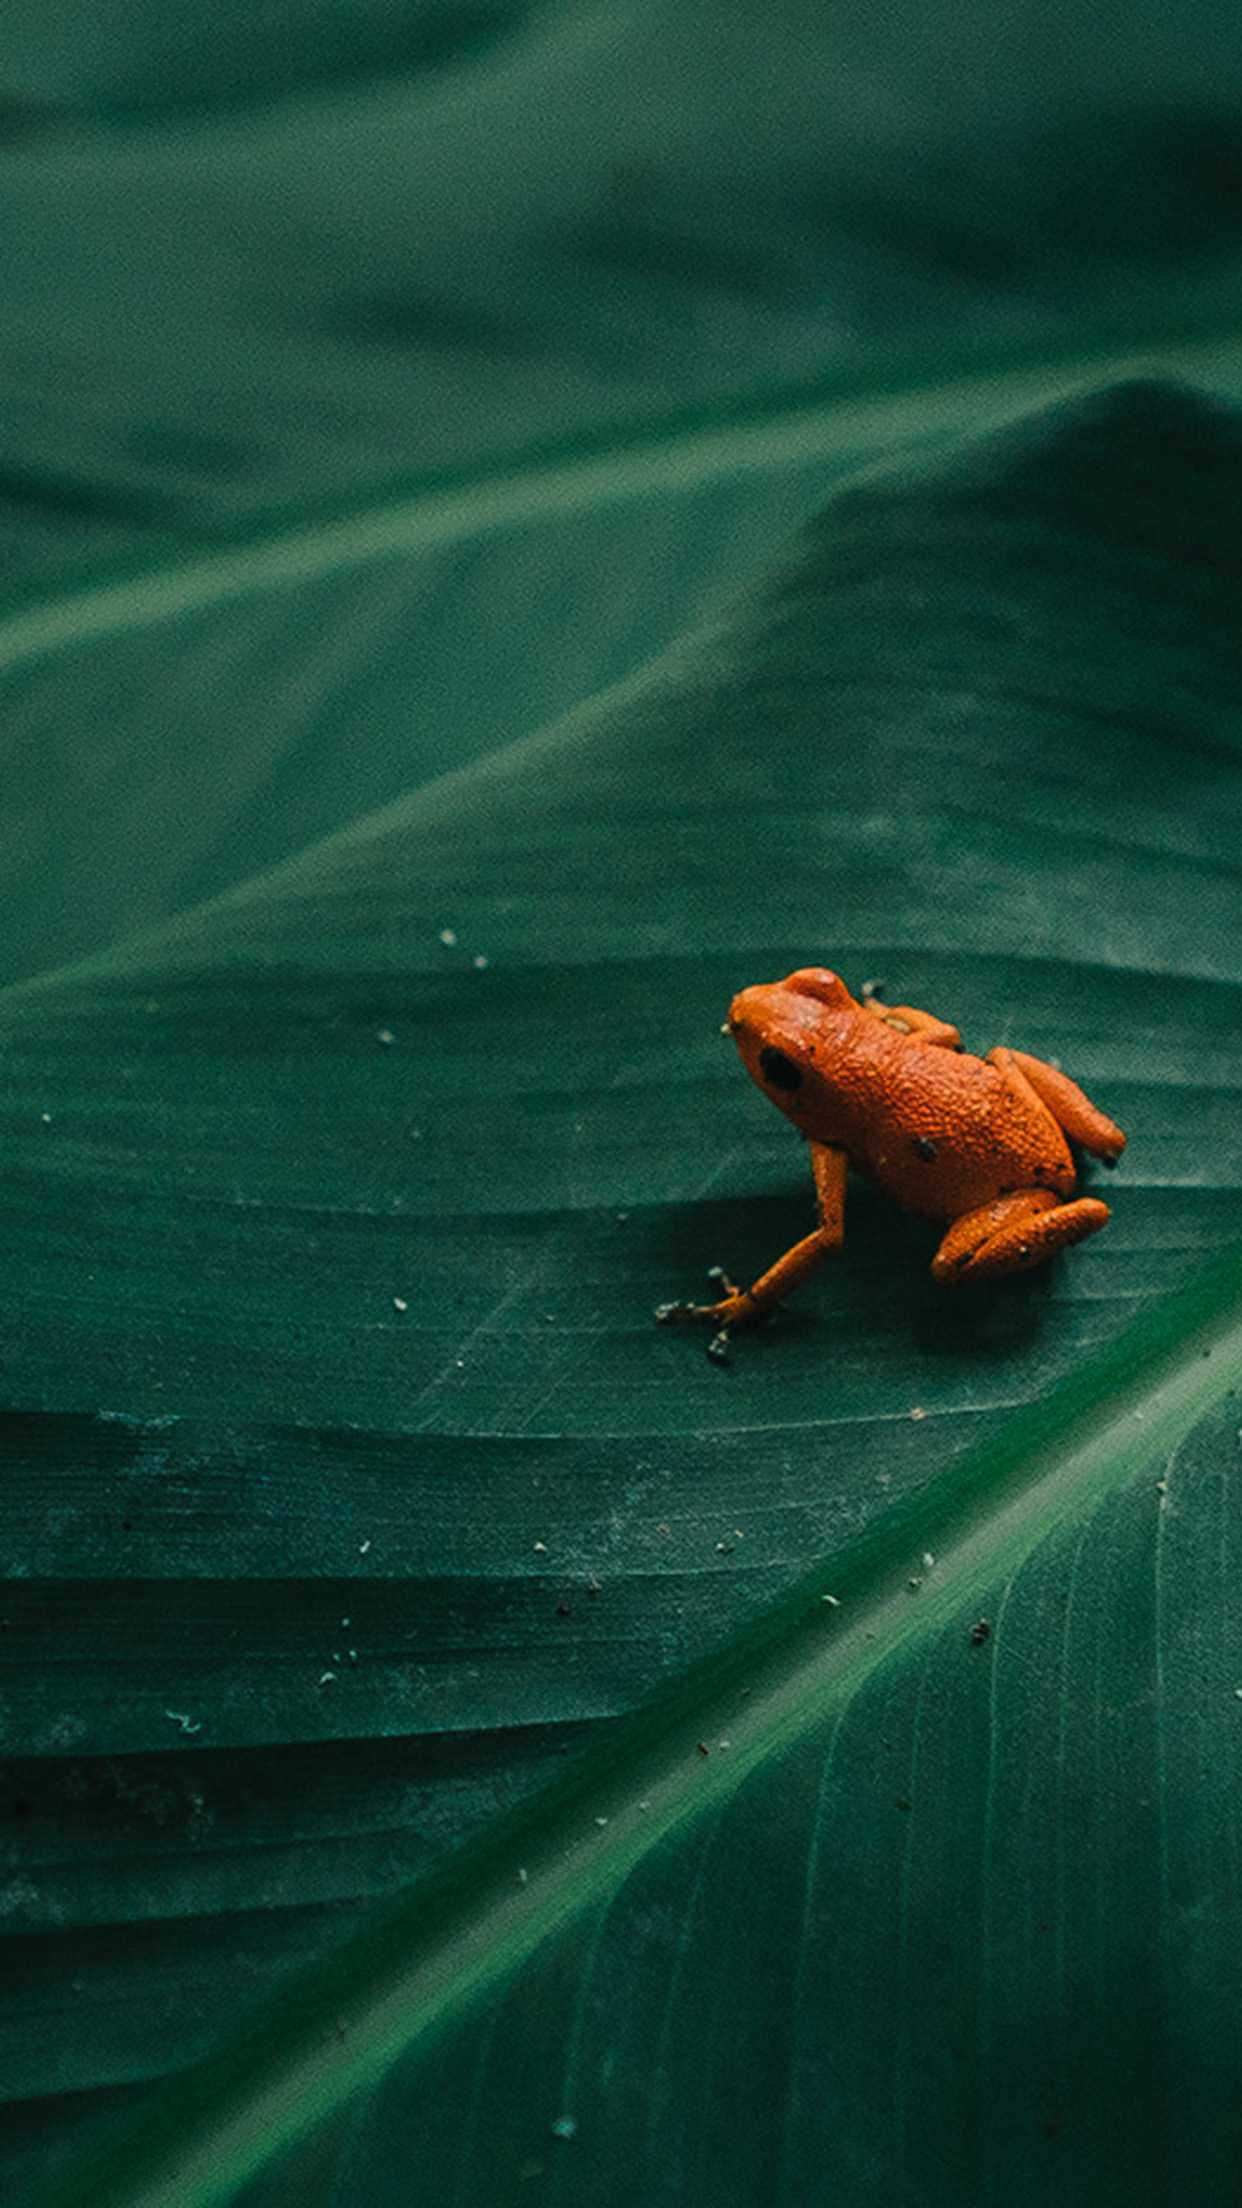 A Frog Sitting On Top Of A Leaf